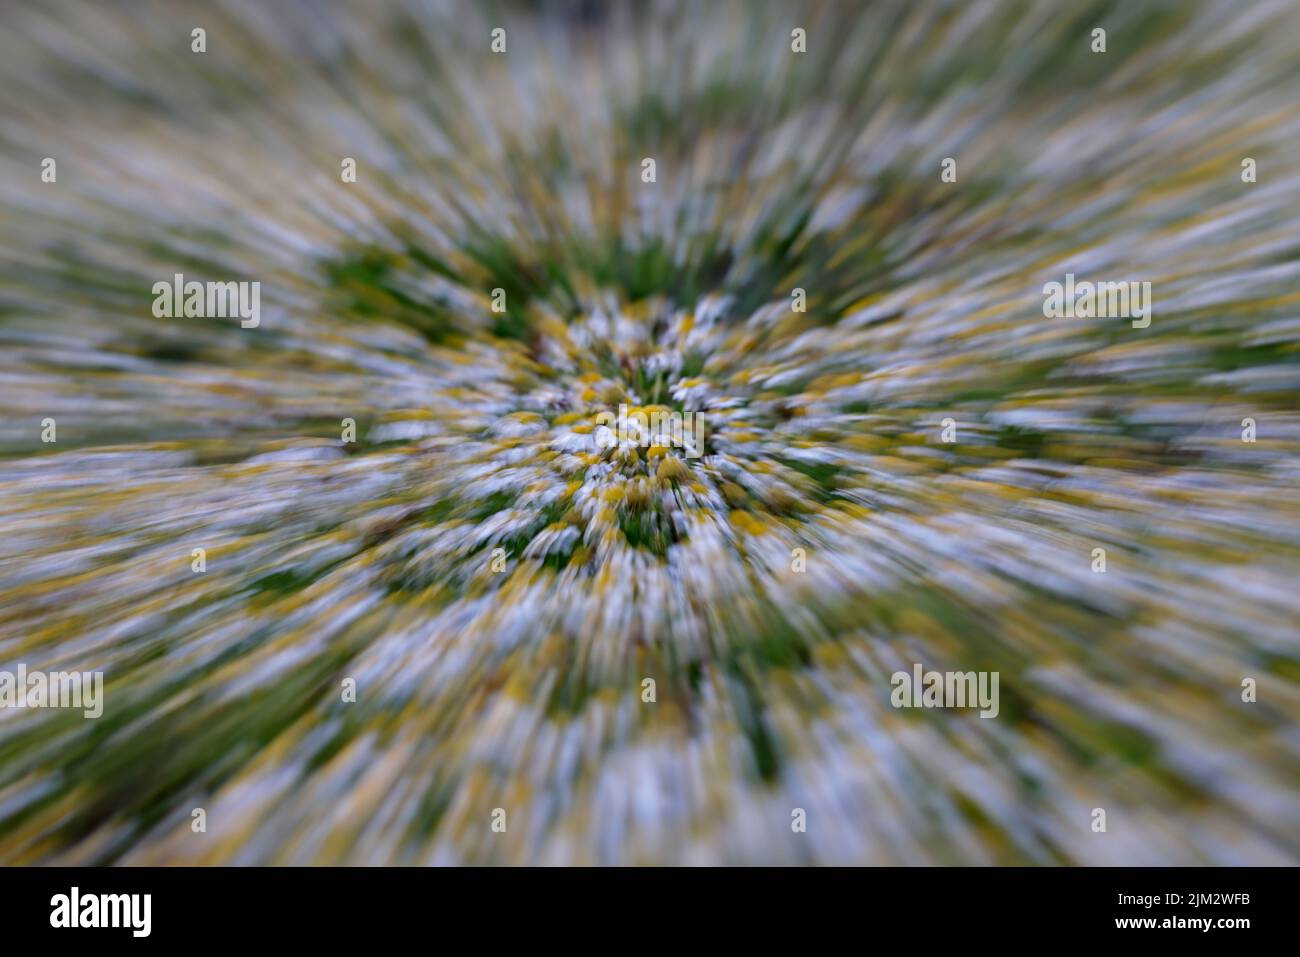 Scentless Mayweed on Skokholm with slow shutter speed and zooming Stock Photo